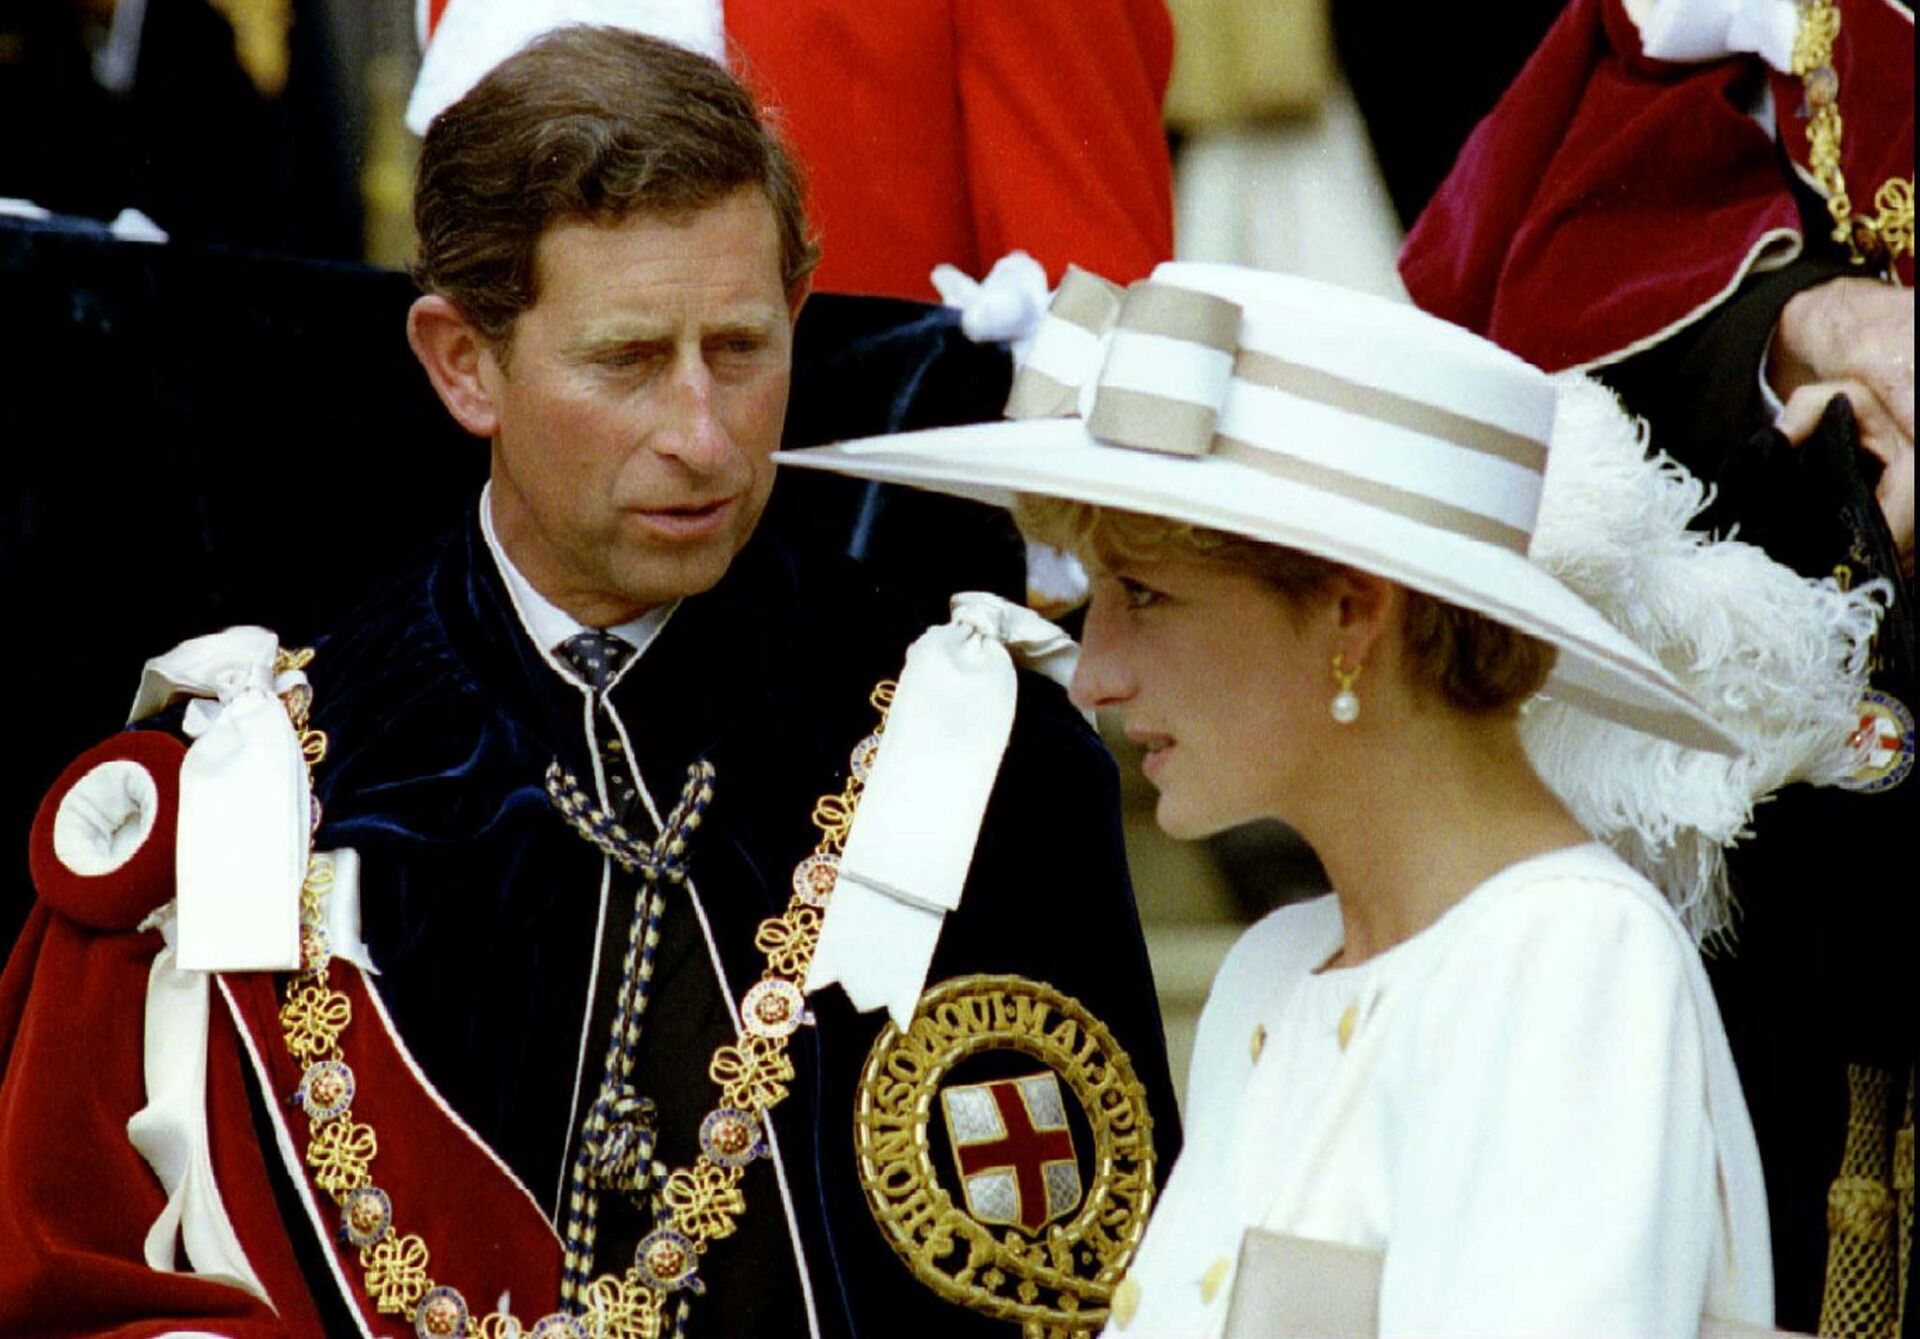 Prince Charles looks towards Princess Diana as they await their carriage to depart the Order of the Garter ceremony at Windsor Castle June 15, 1992 - Sputnik International, 1920, 29.12.2021